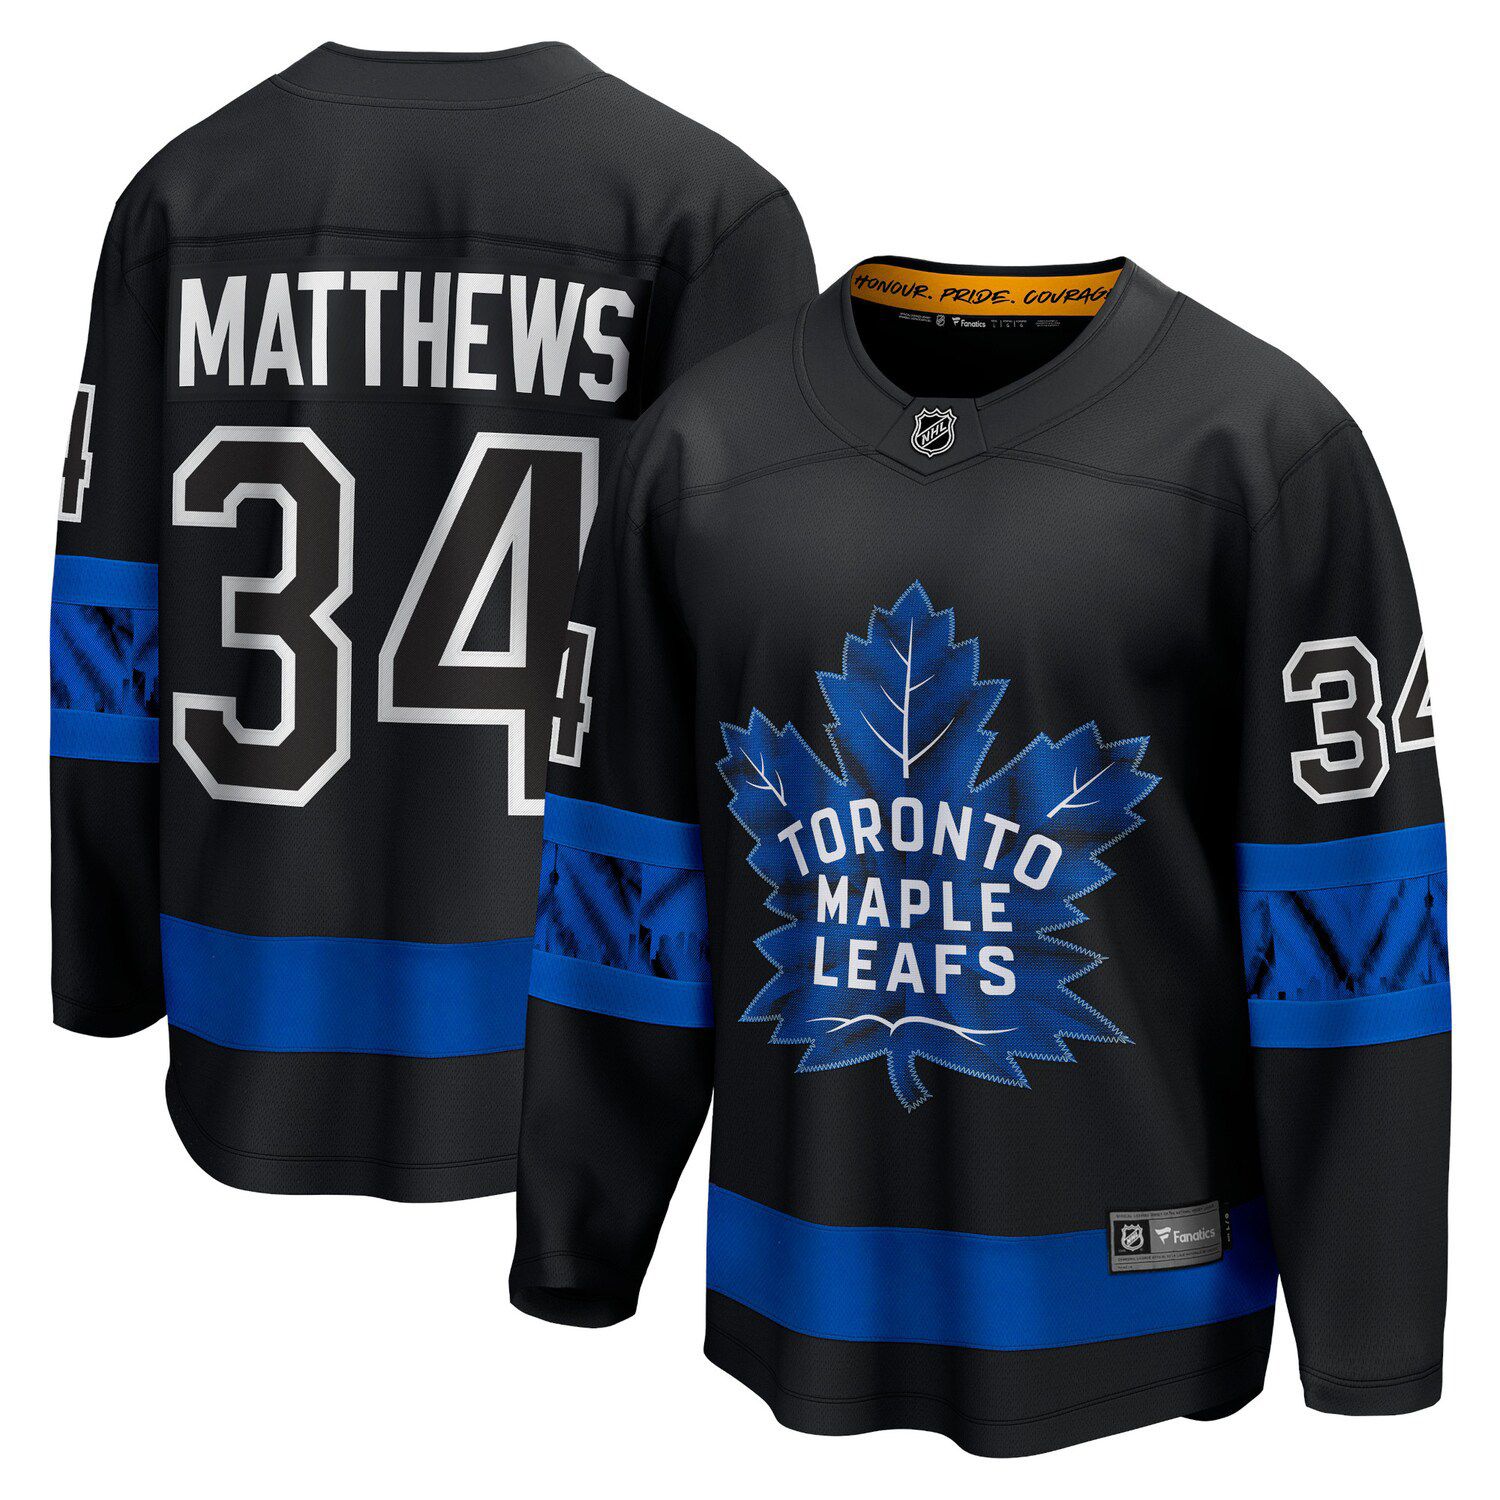 Outerstuff Toronto Maple Leafs Infant Premier Home Jersey